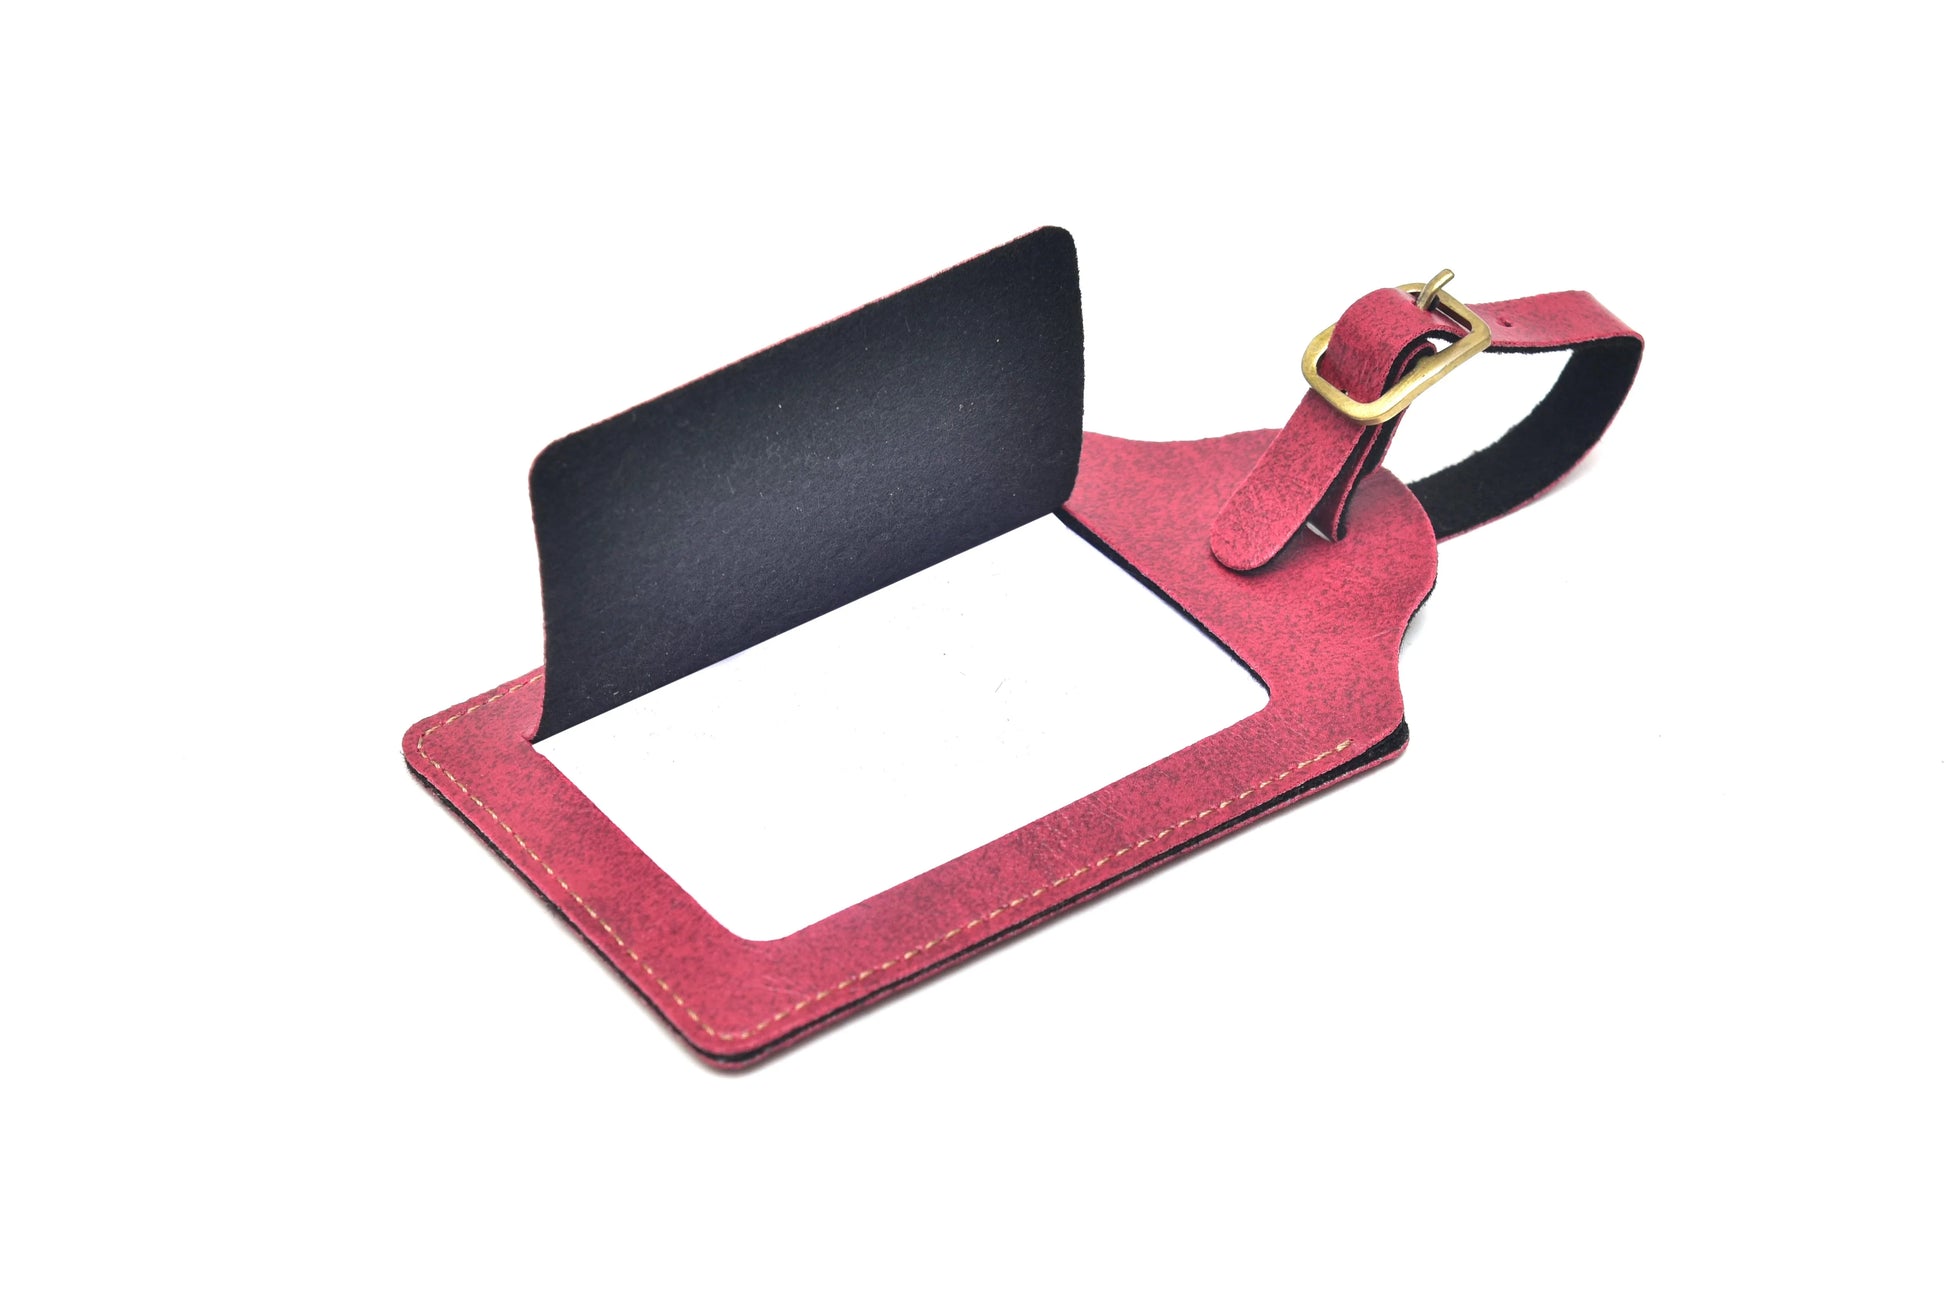 Open view of luggage tag